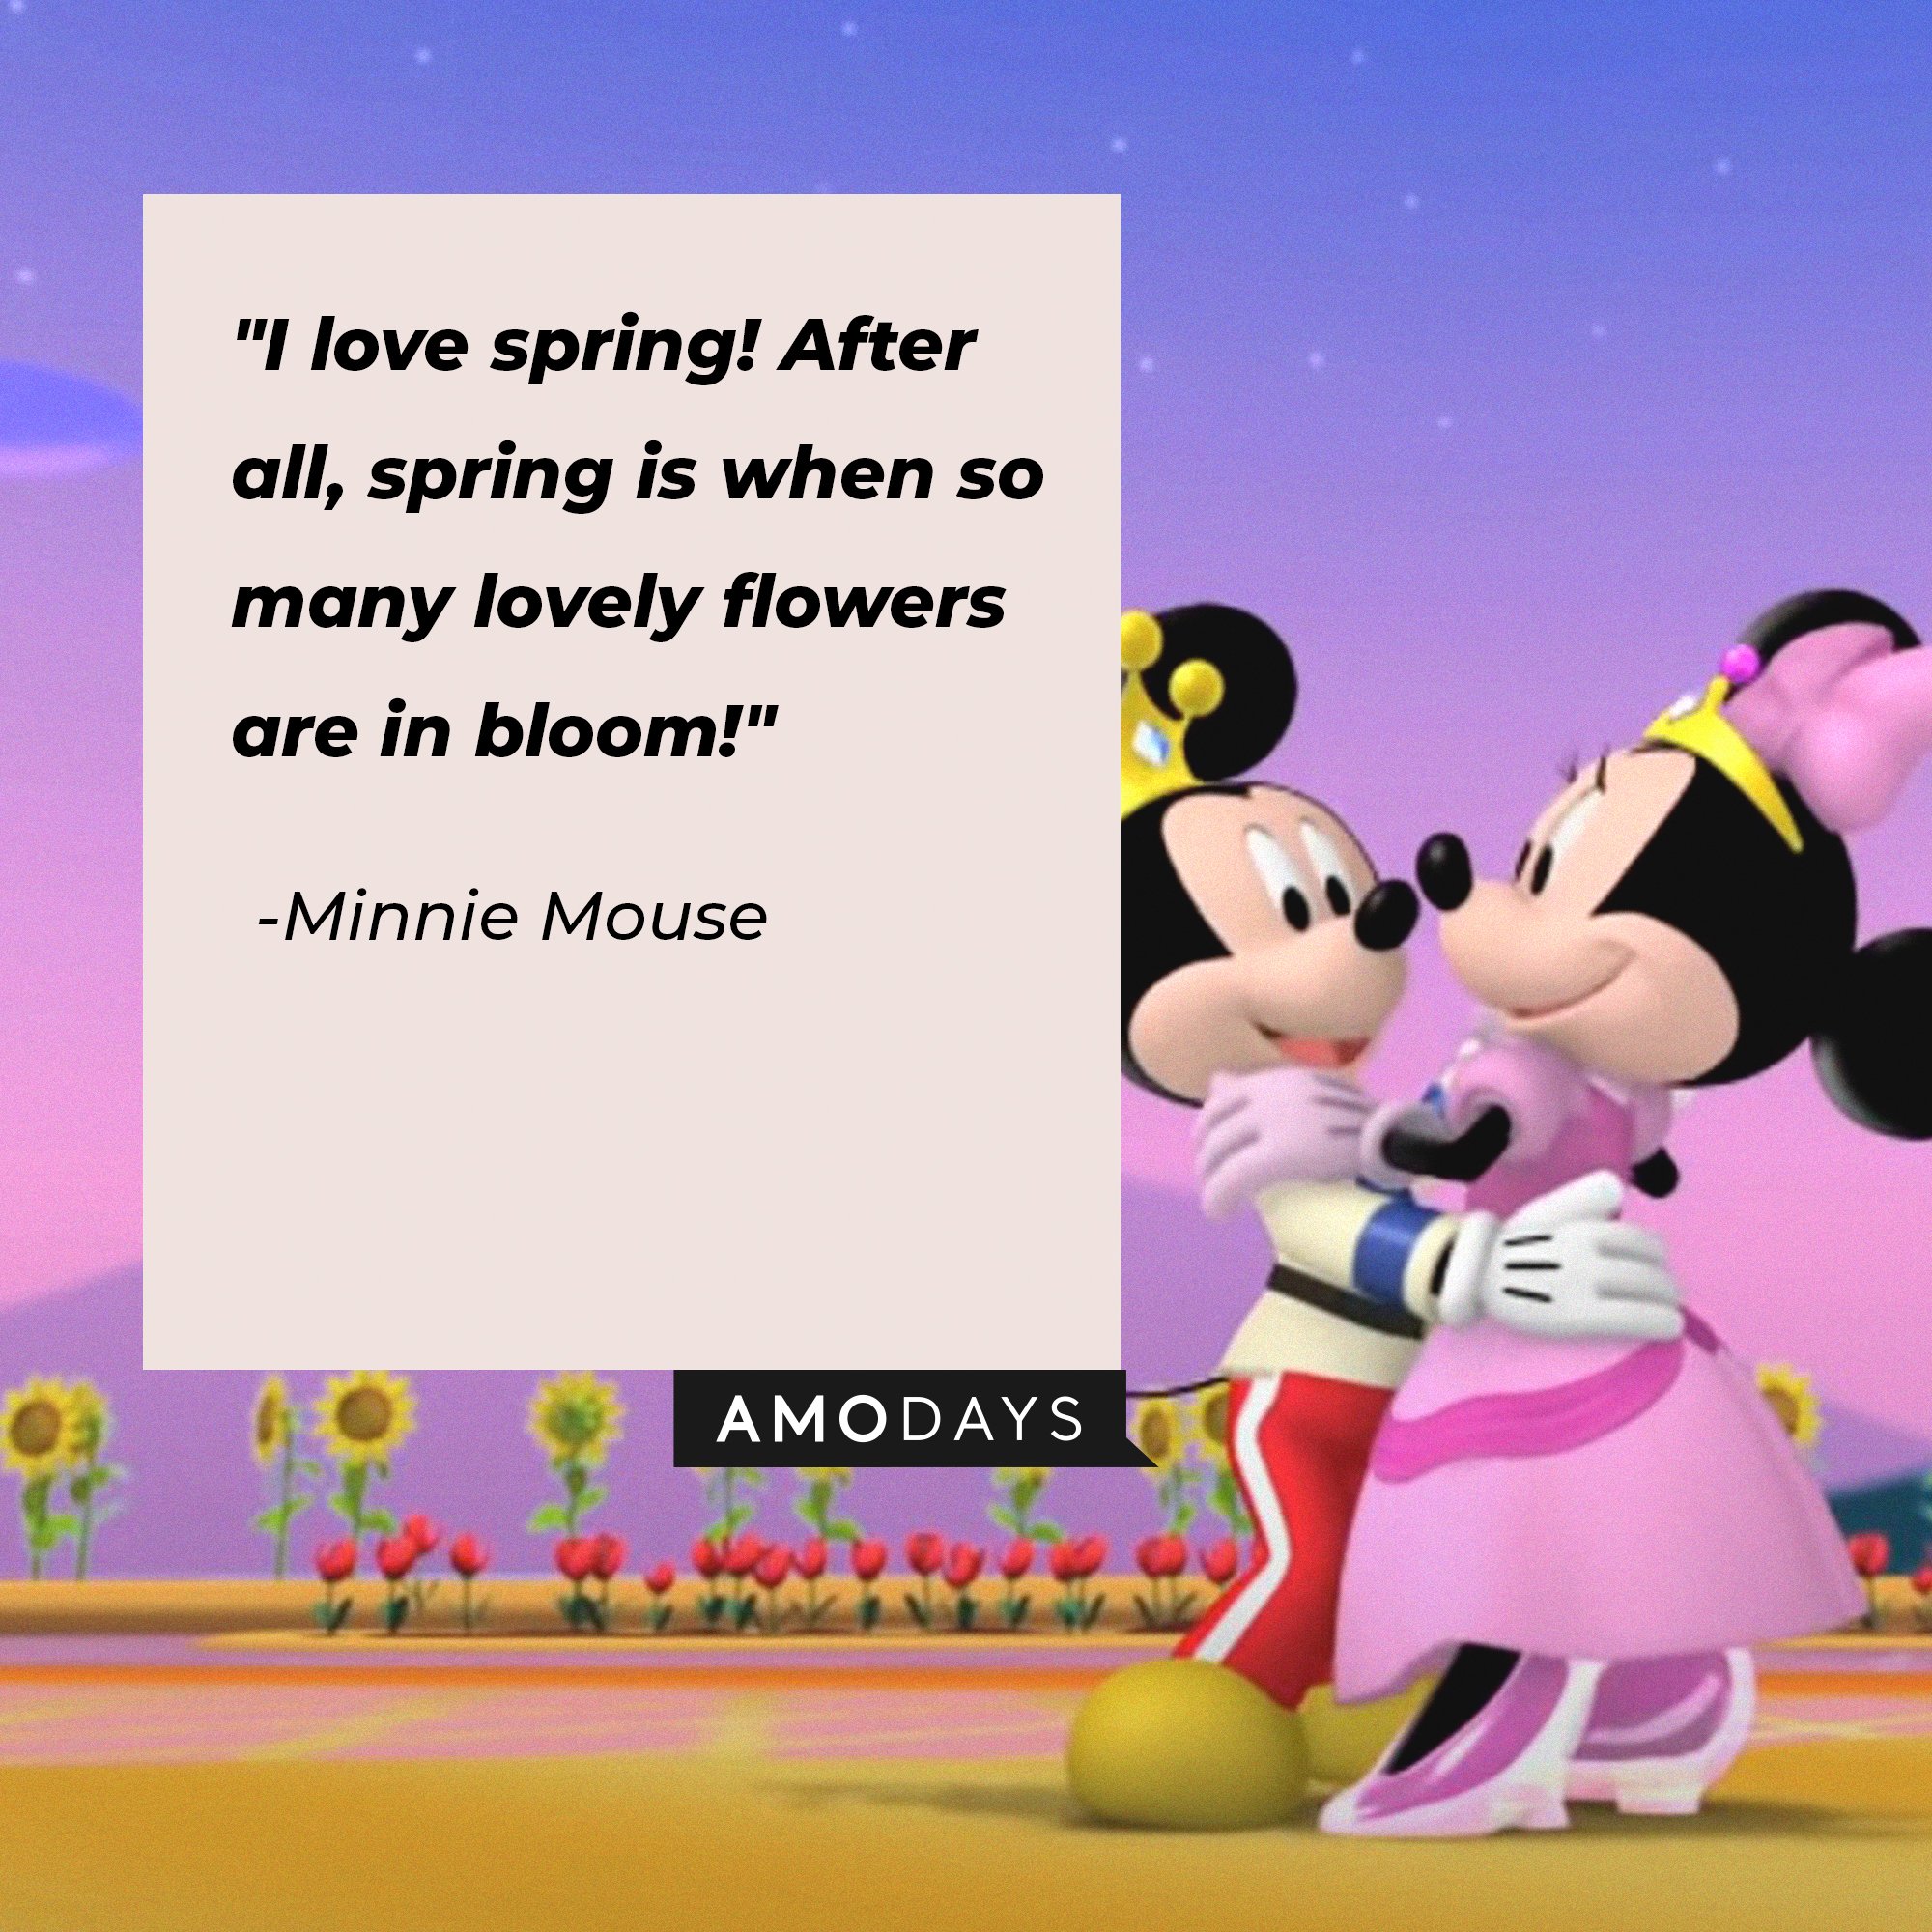 Minnie Mouse’s quote: "I love spring! After all, spring is when so many lovely flowers are in bloom!" | Image: AmoDays